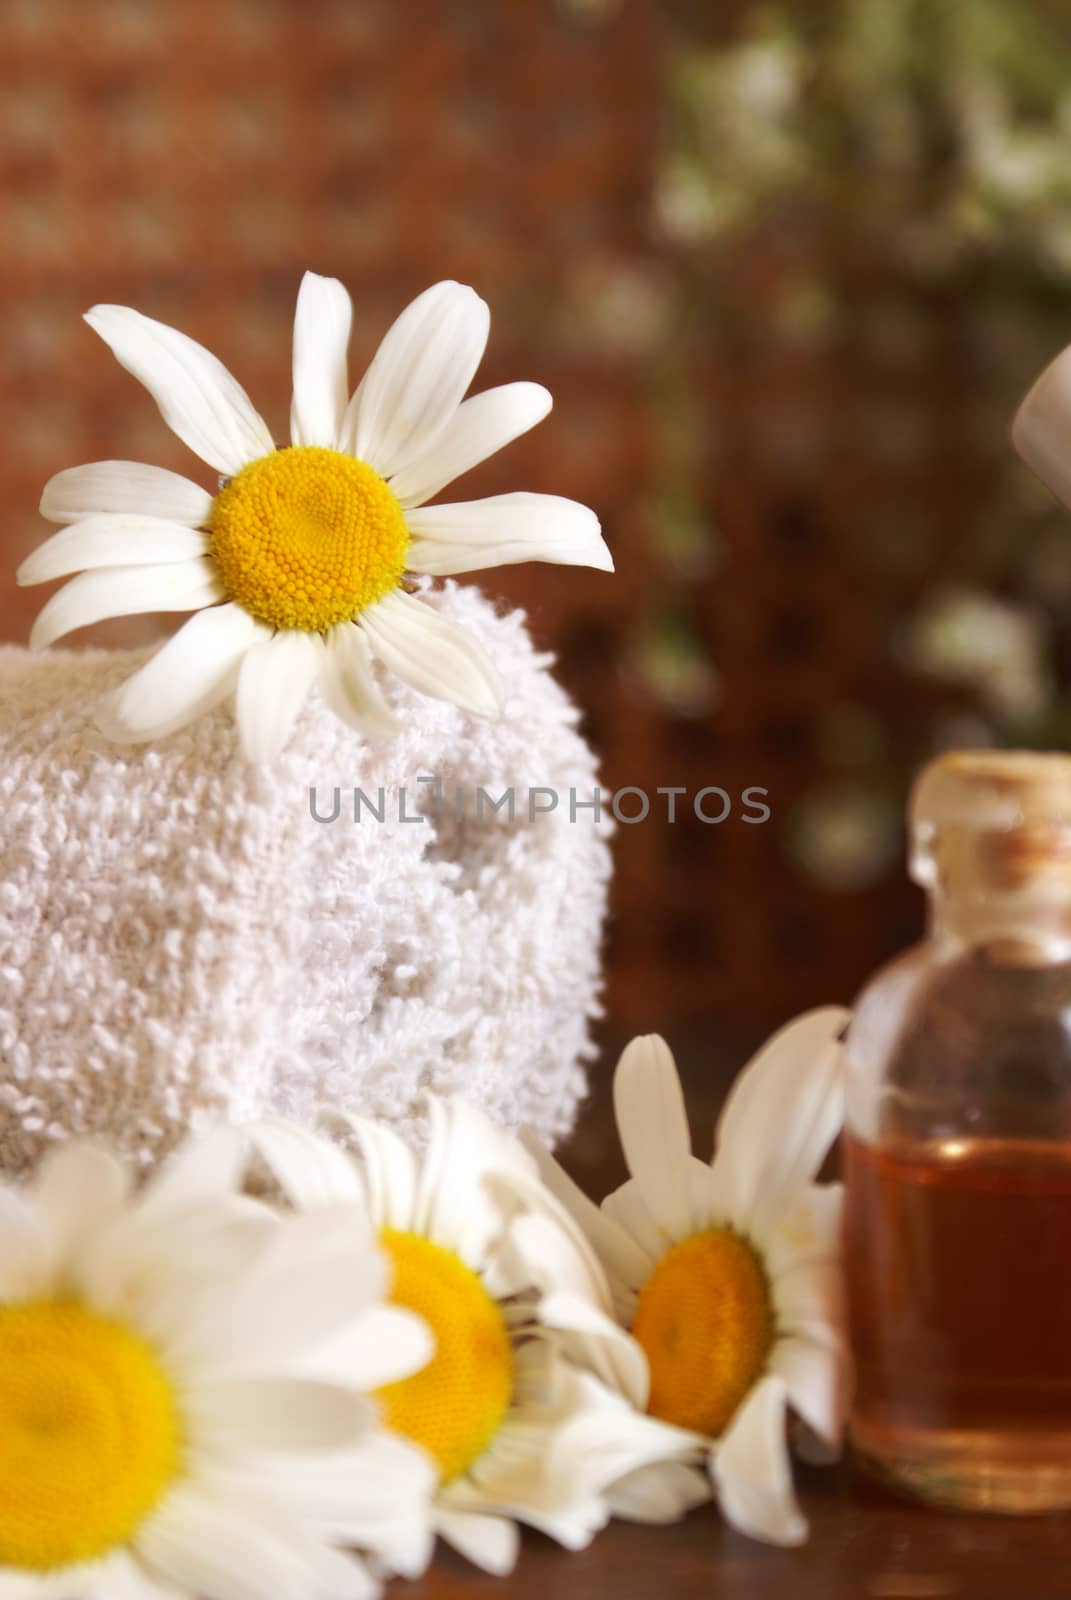 Lovely themed image of effective spa treatments using Chamomile.